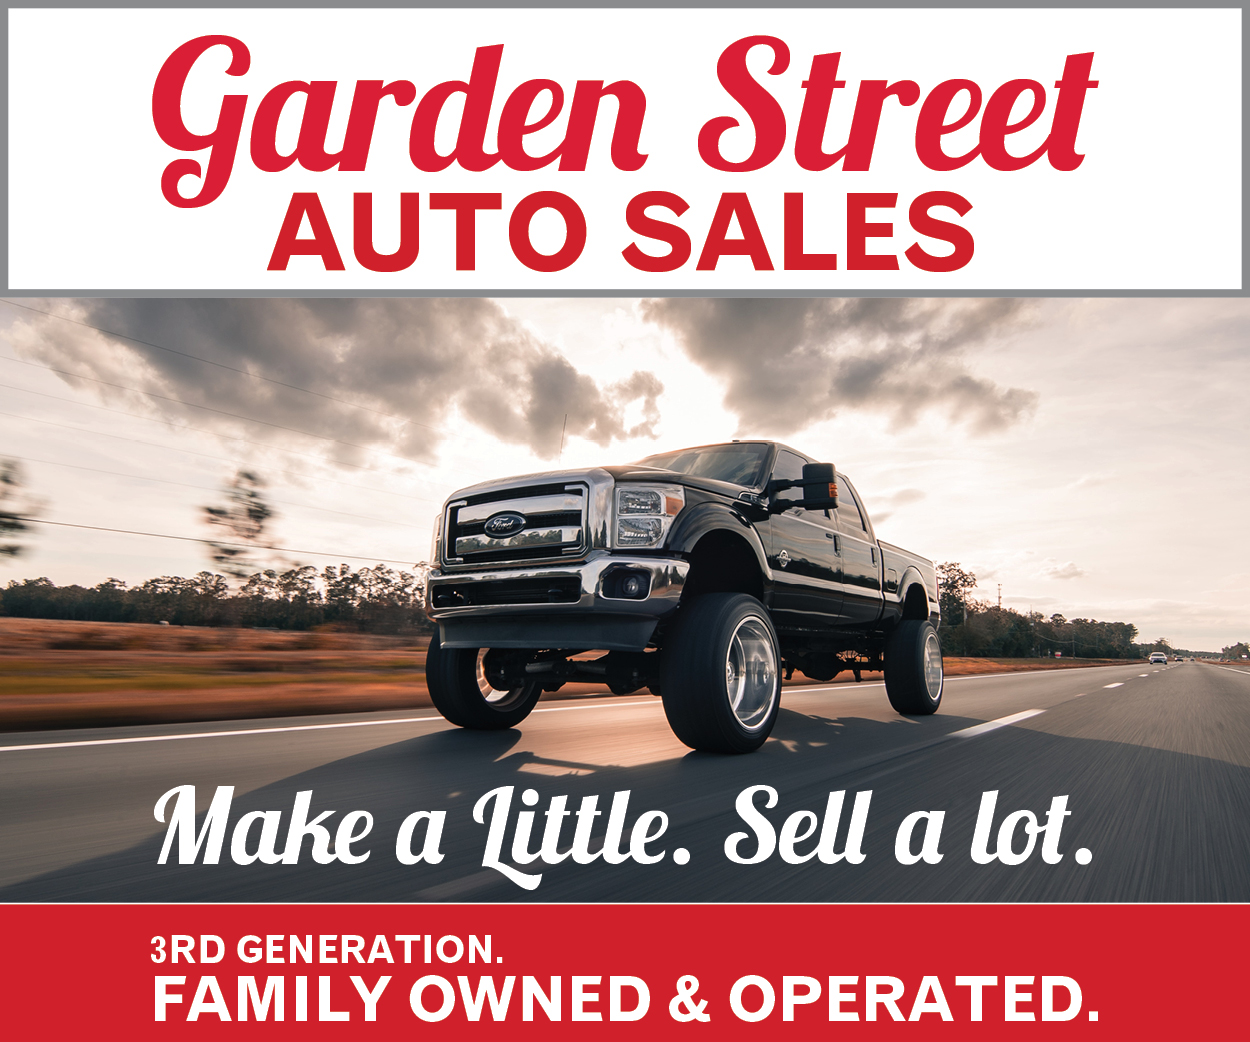 More from Garden Street Auto Sales